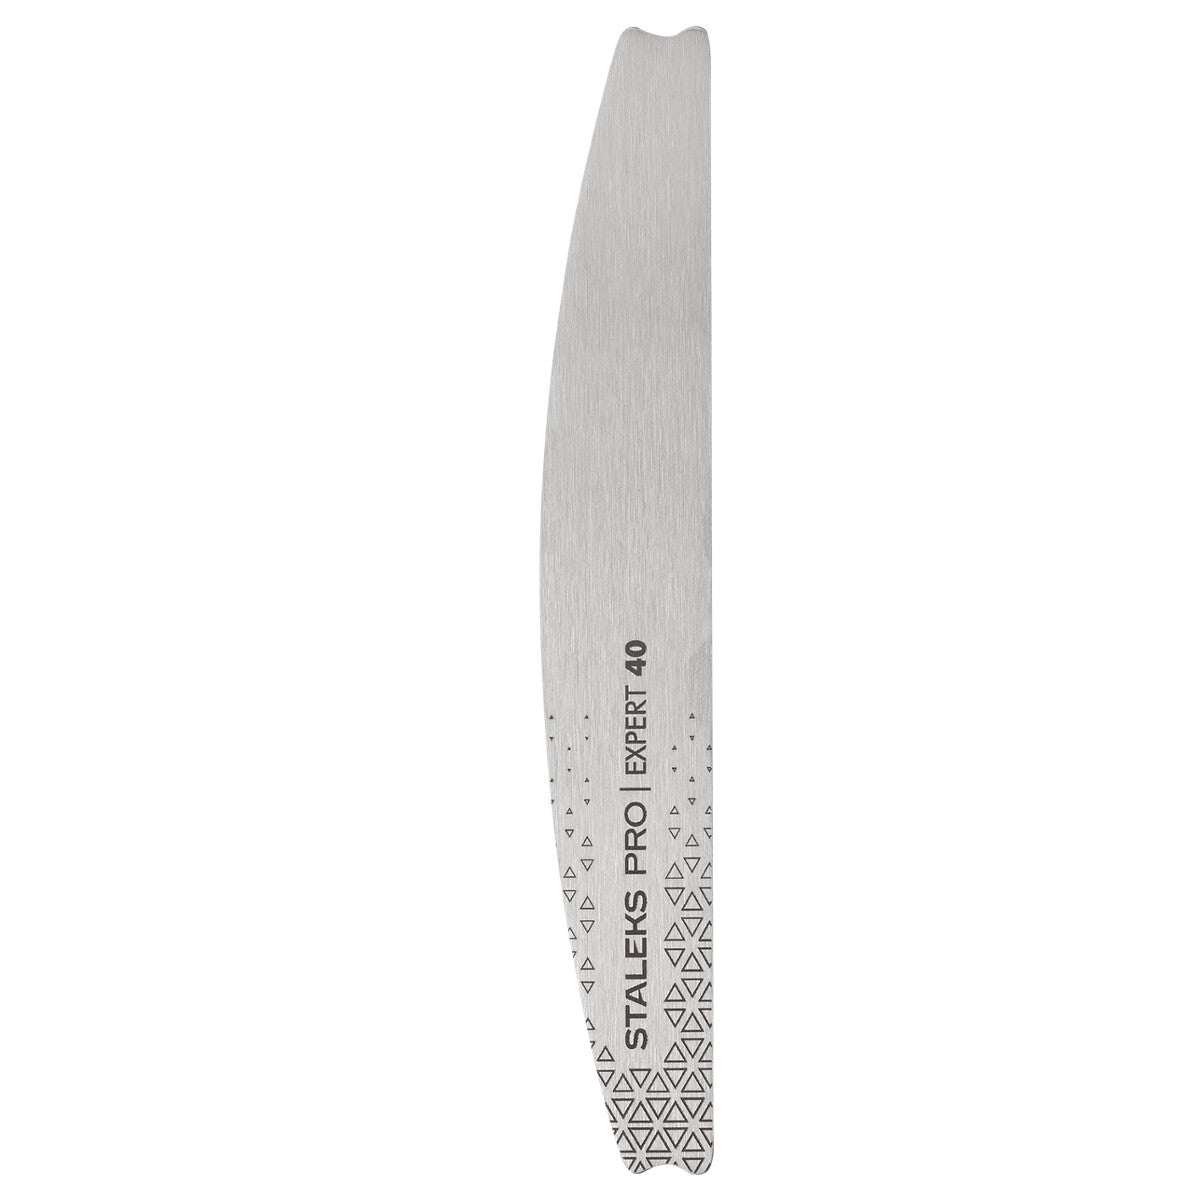    Staleks_Nail_file_metal_crescent_Base_EXPERT_40_MBE-40_4 product view 4